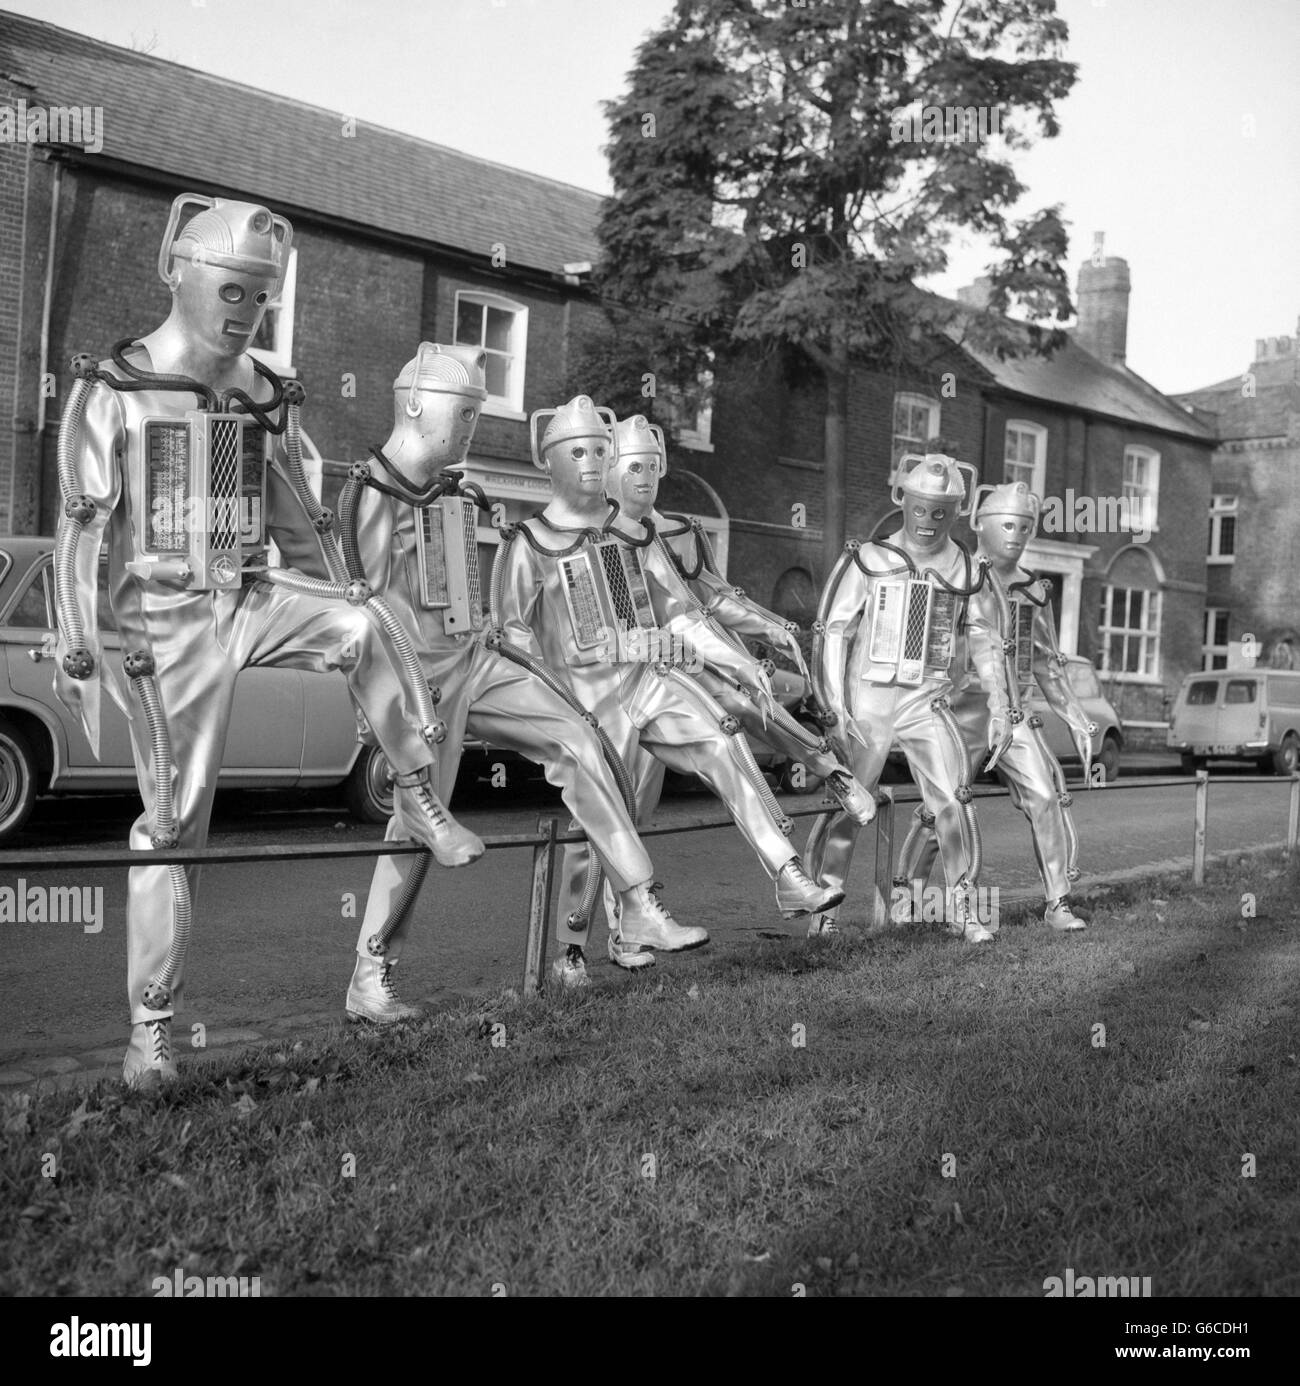 Television - BBC - Doctor Who - London. Actors playing Cybermen in BBC's Doctor Who take a break from filming in Ealing, London. Stock Photo